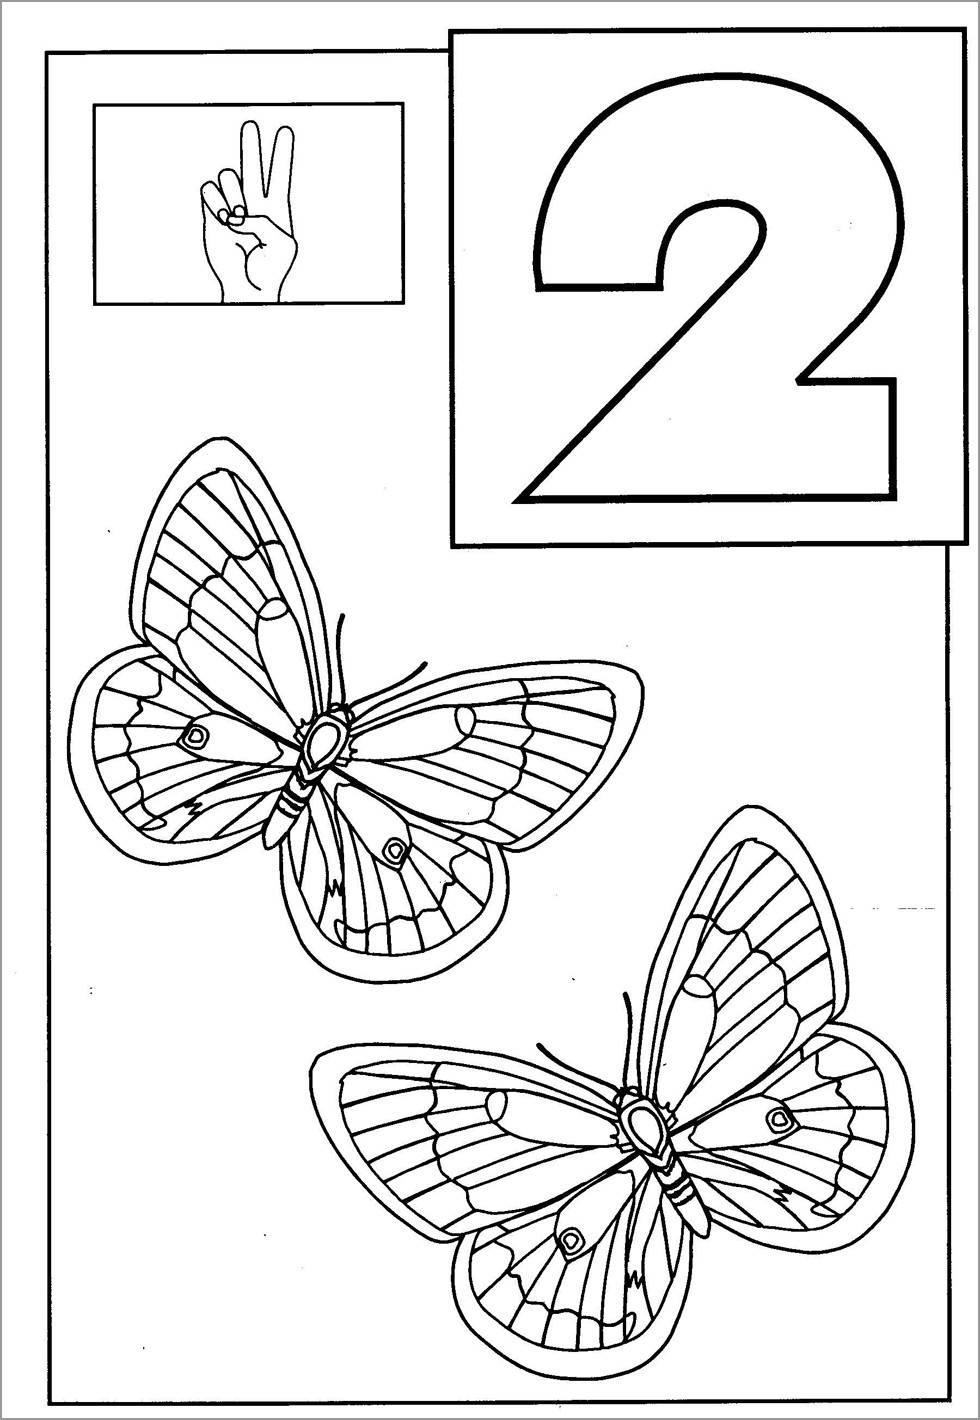 2 butterflies Coloring Page